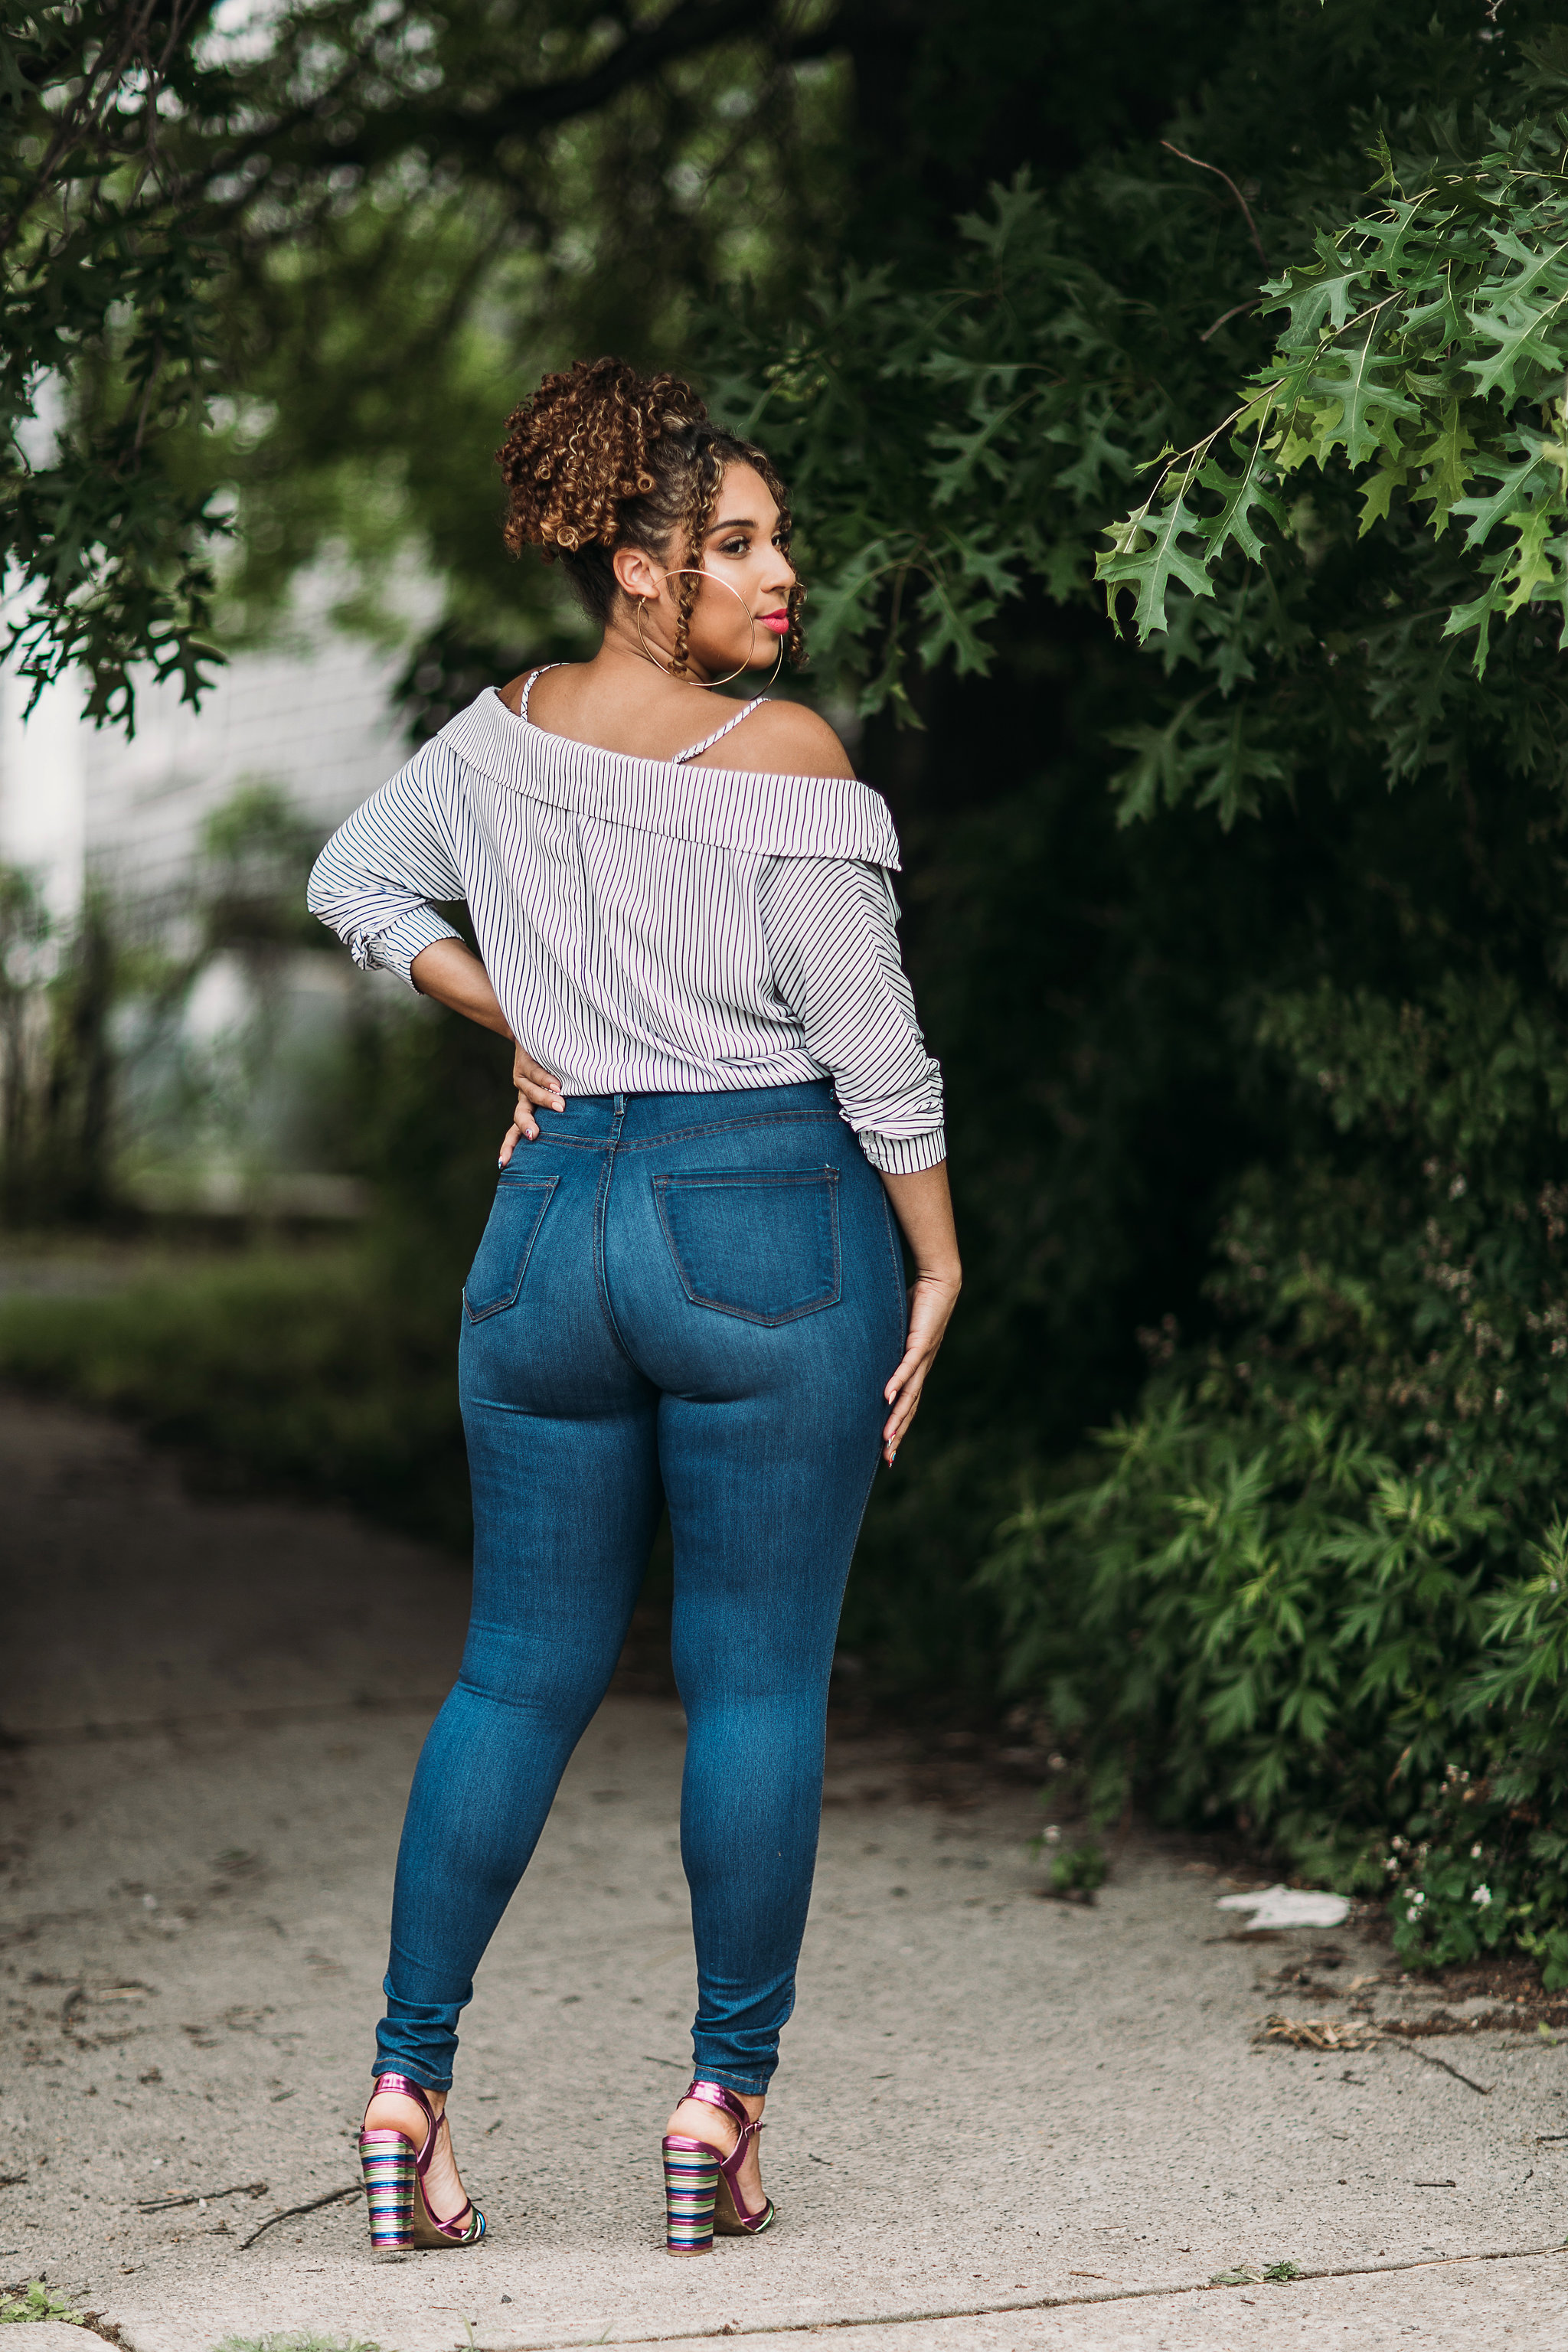 Are Fashion Nova Jeans for Curvy Girls? — All Things Ada